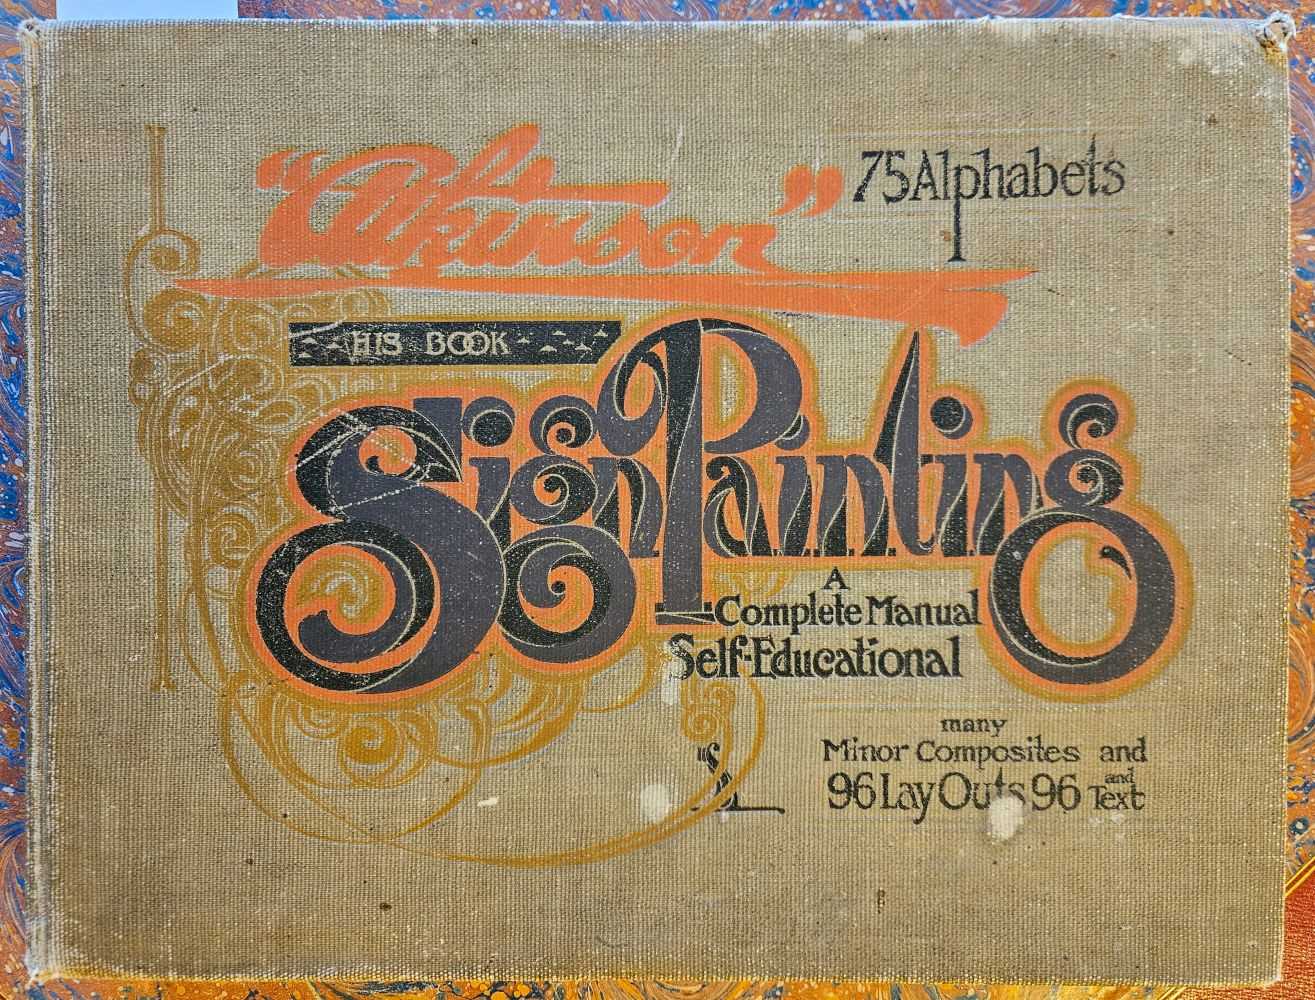 Lot 327 - Atkinson (Frank H.). "Atkinson" Sign Painting up to Now, 1st edition, 1909